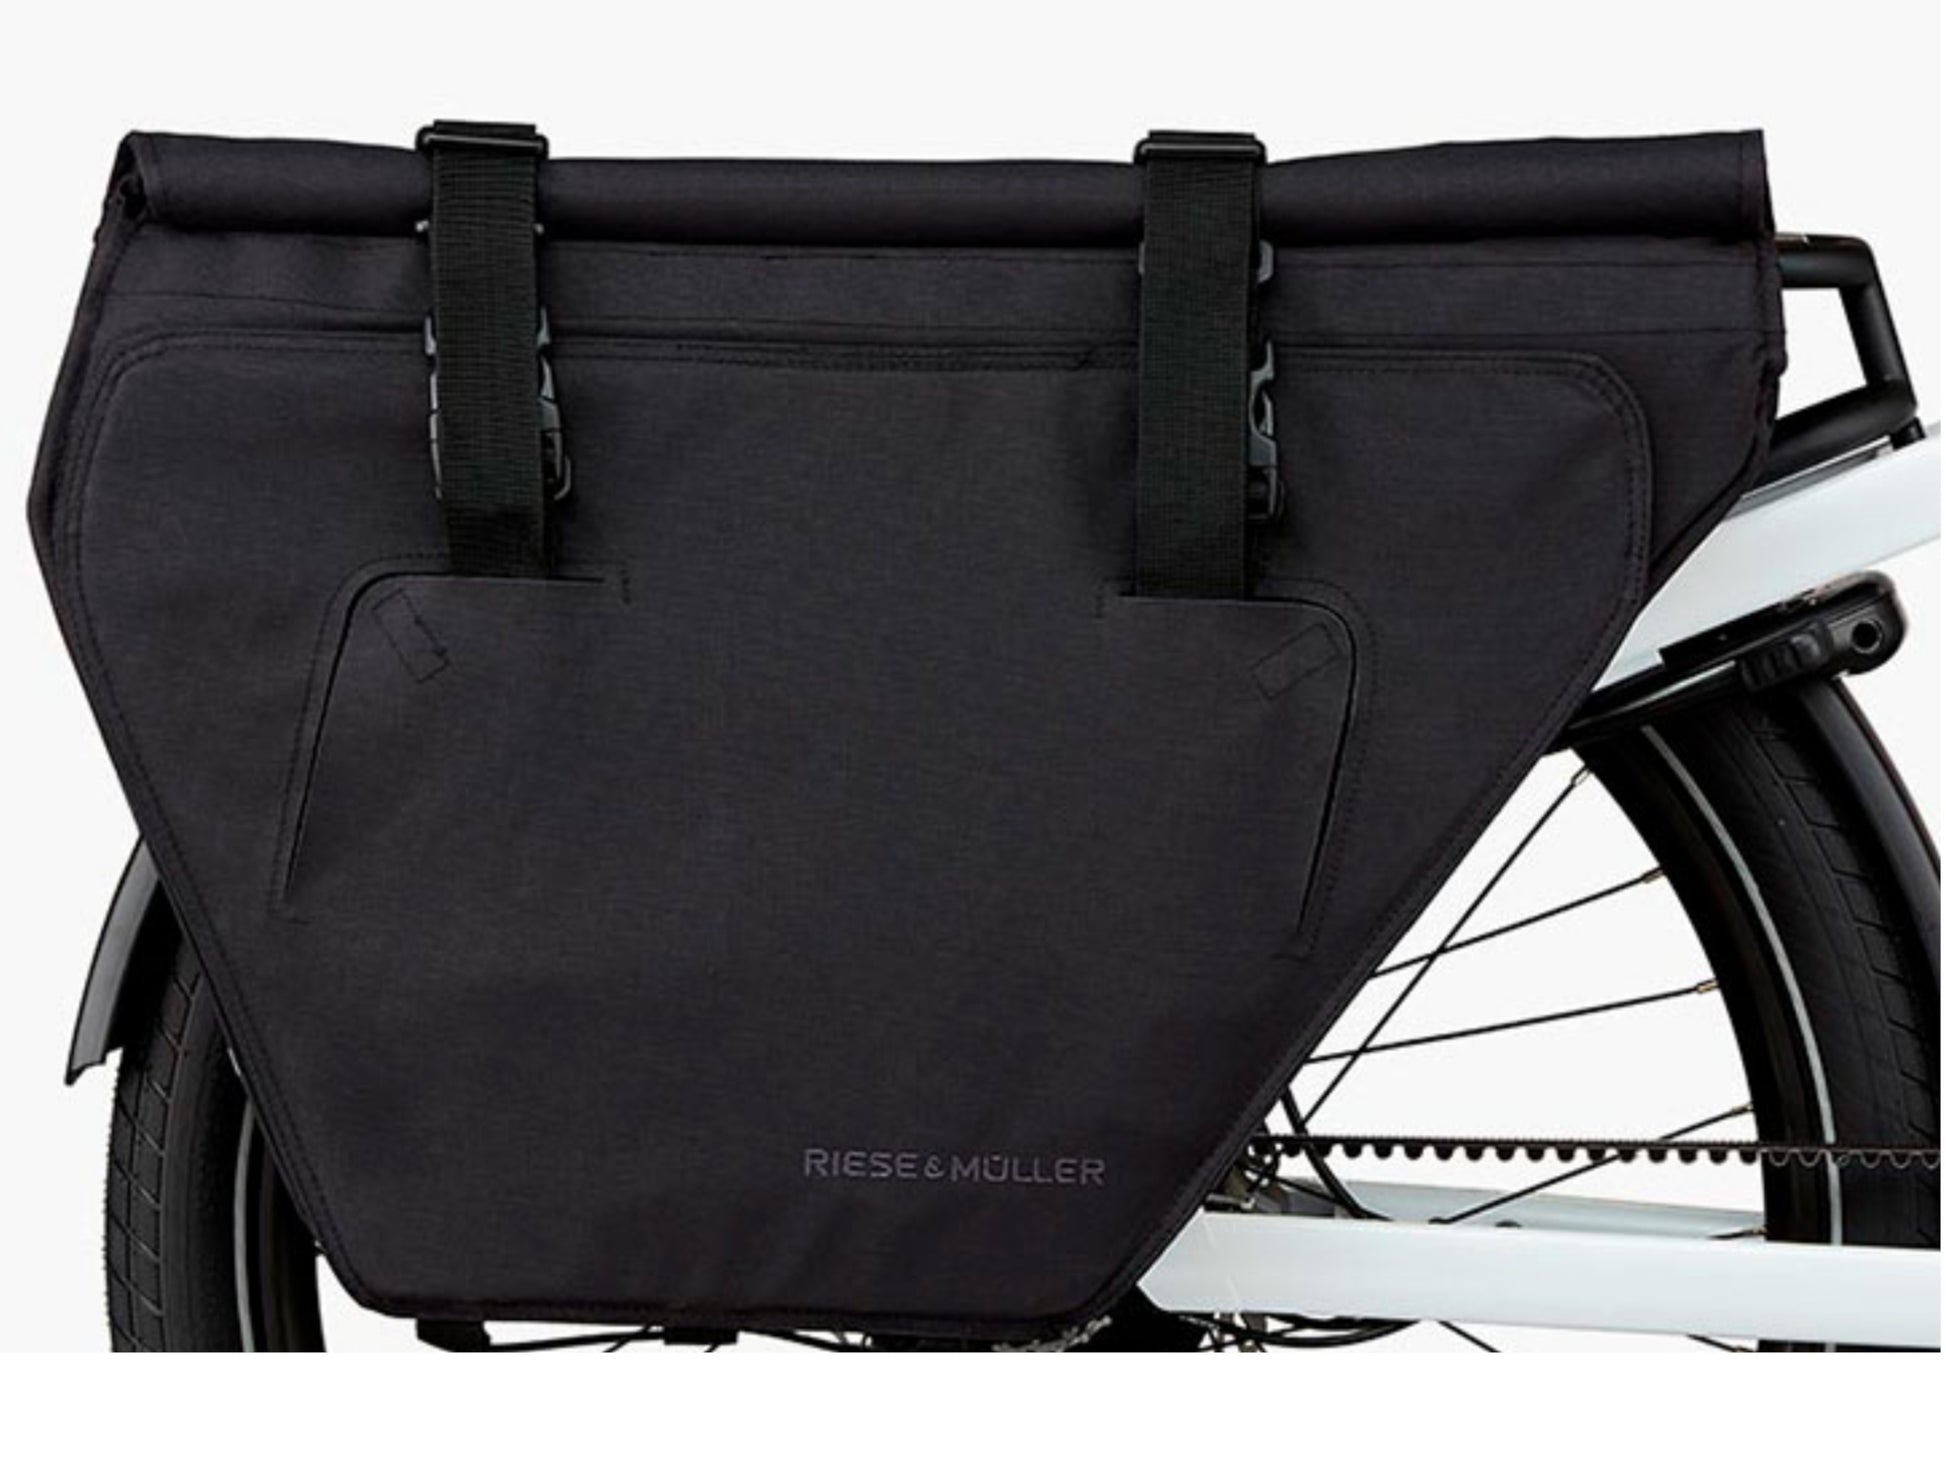 Riese and Muller Multicharger Mixte GT Rohloff emtb hardtail close up rear cargo bags